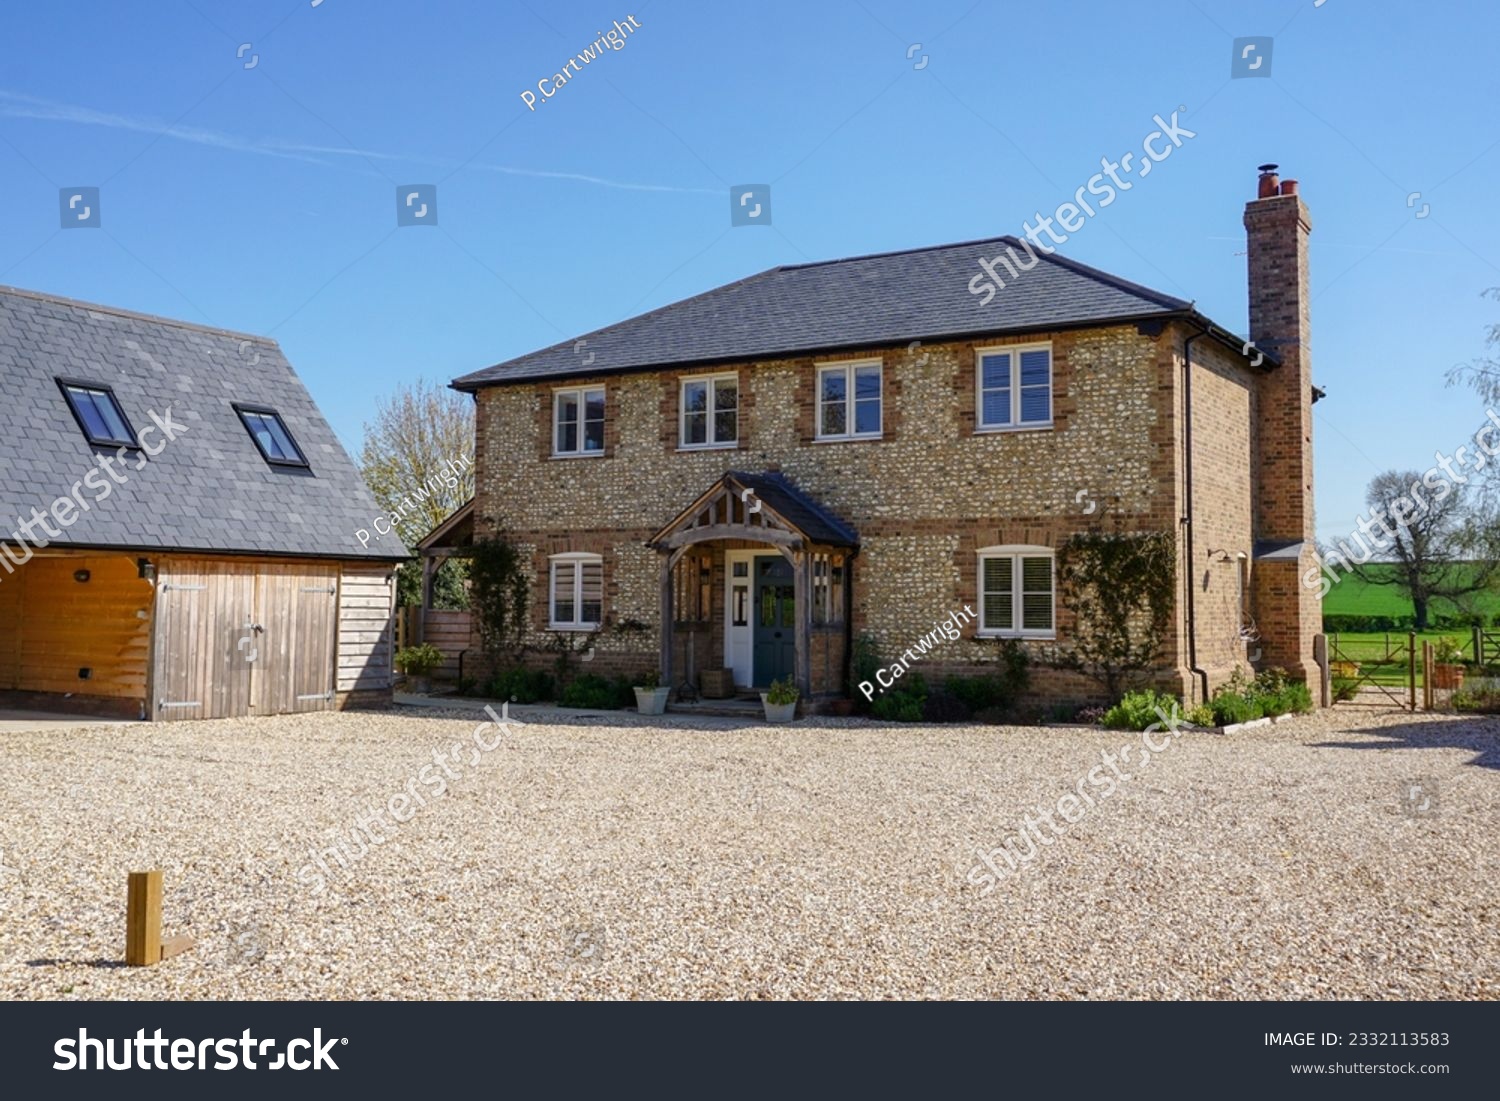 Beautiful house in rural England. Exterior of detached country home  #2332113583